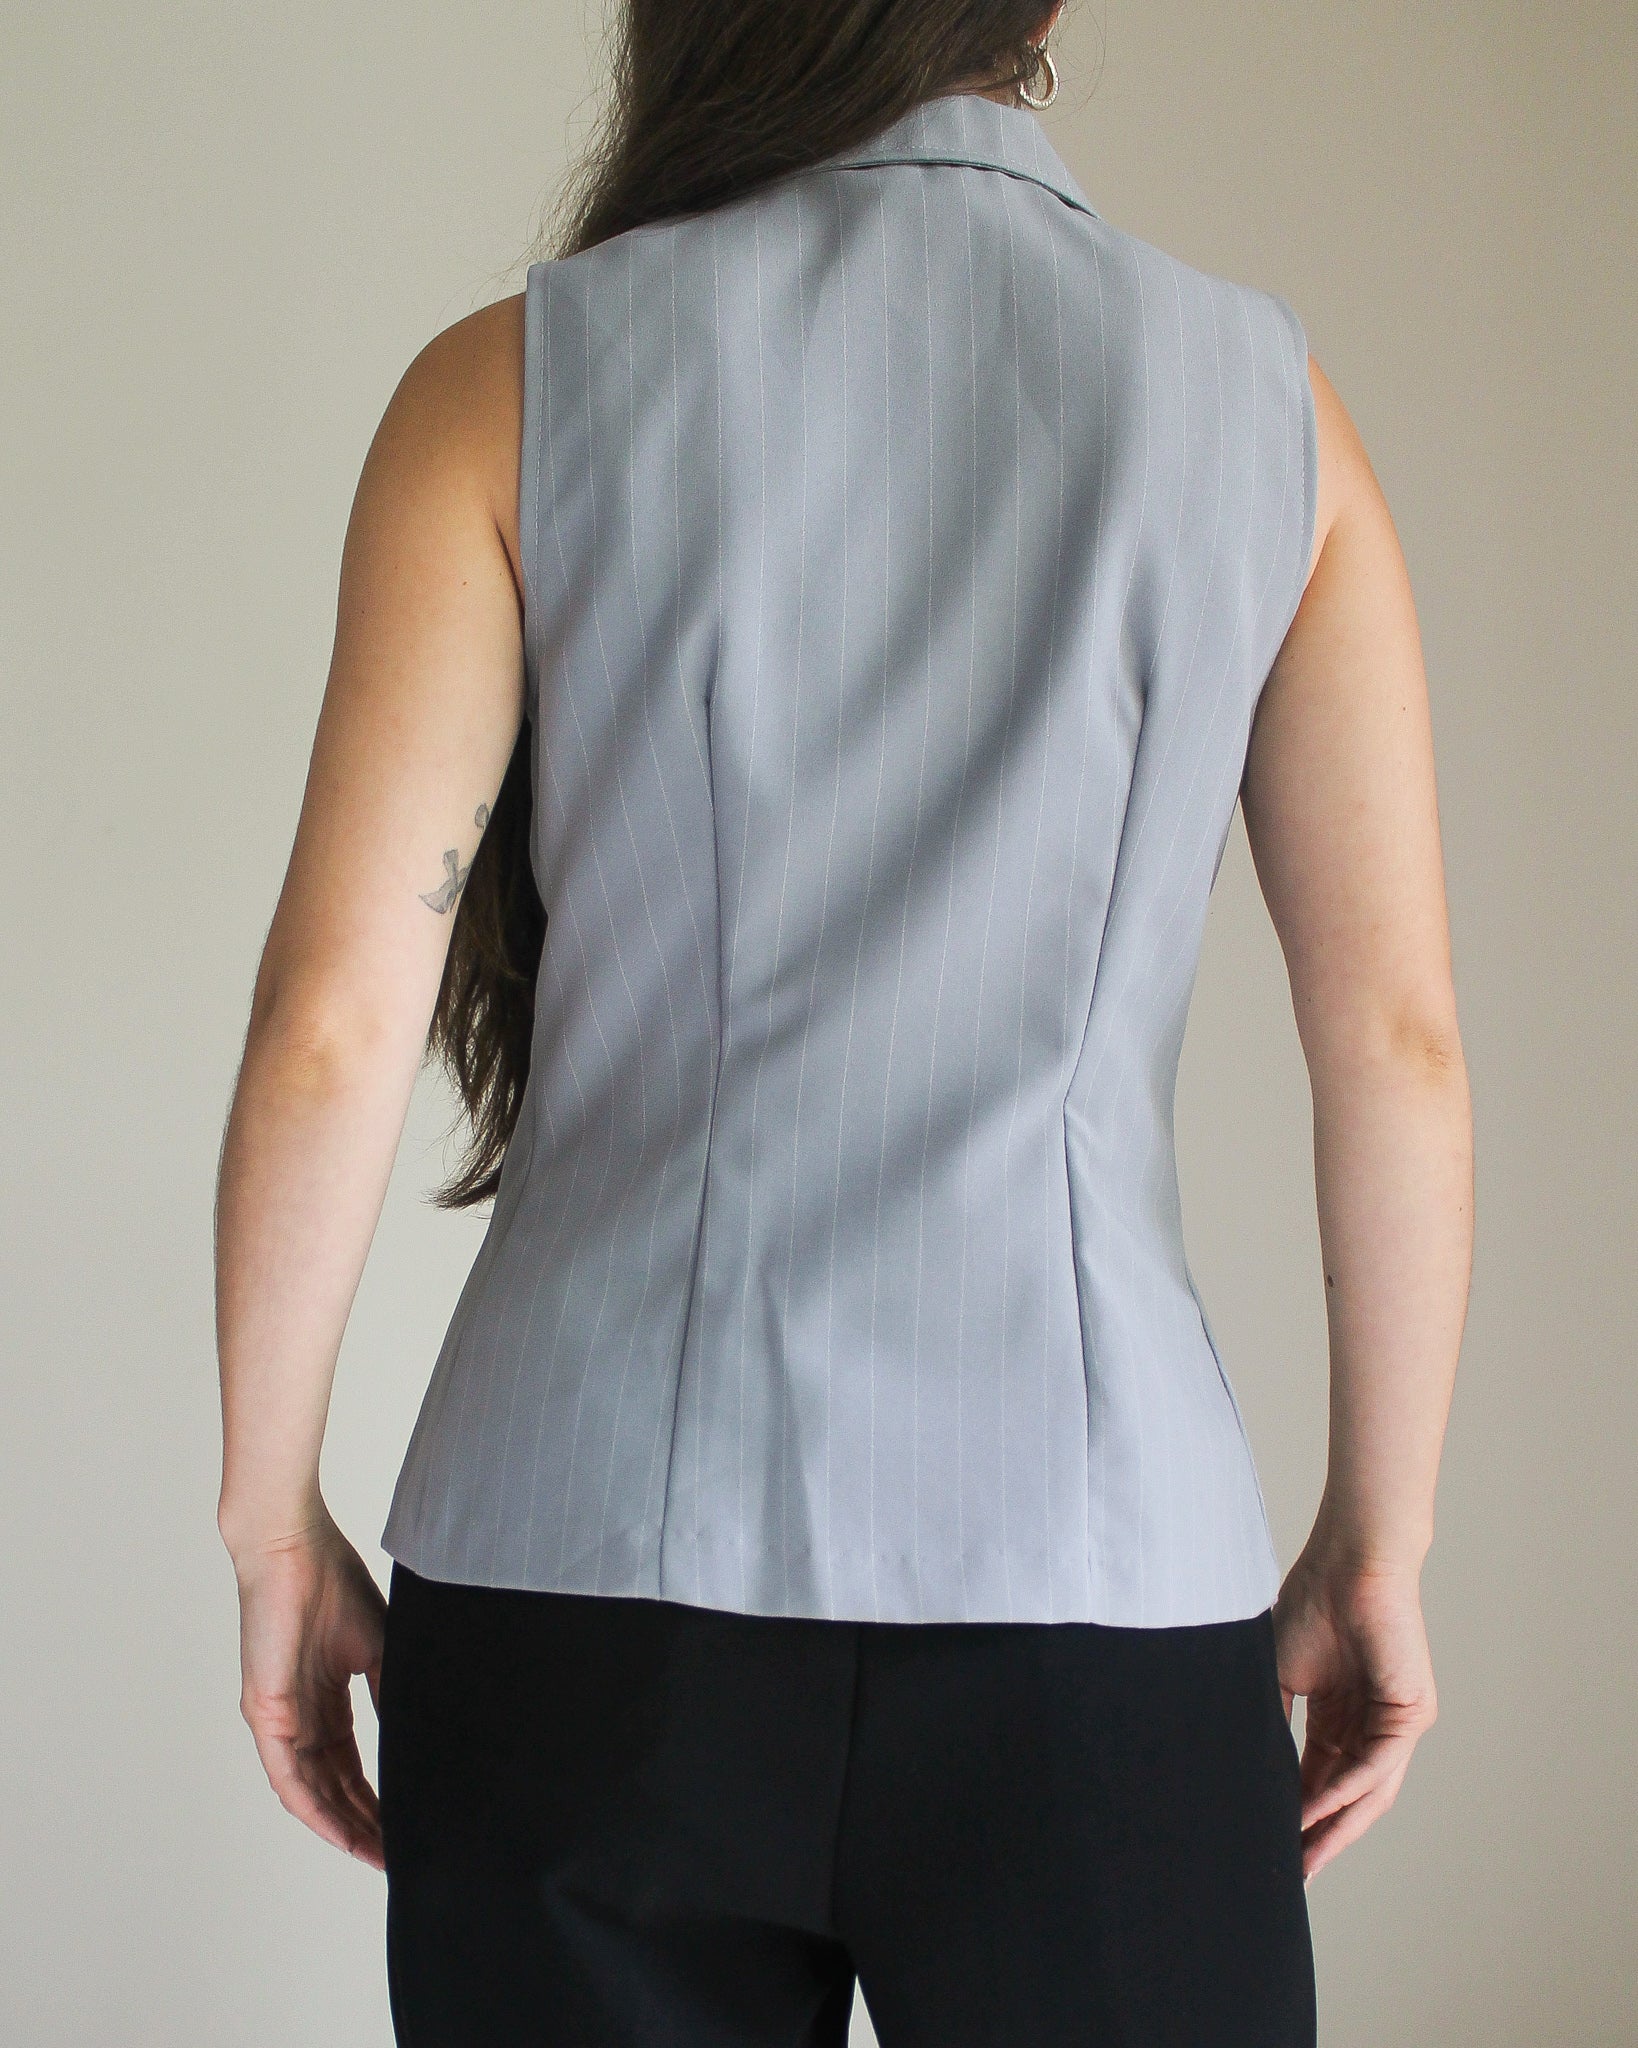 90s Pastel Blue Pinstripe Double Breasted Vest (Fits XS/S)